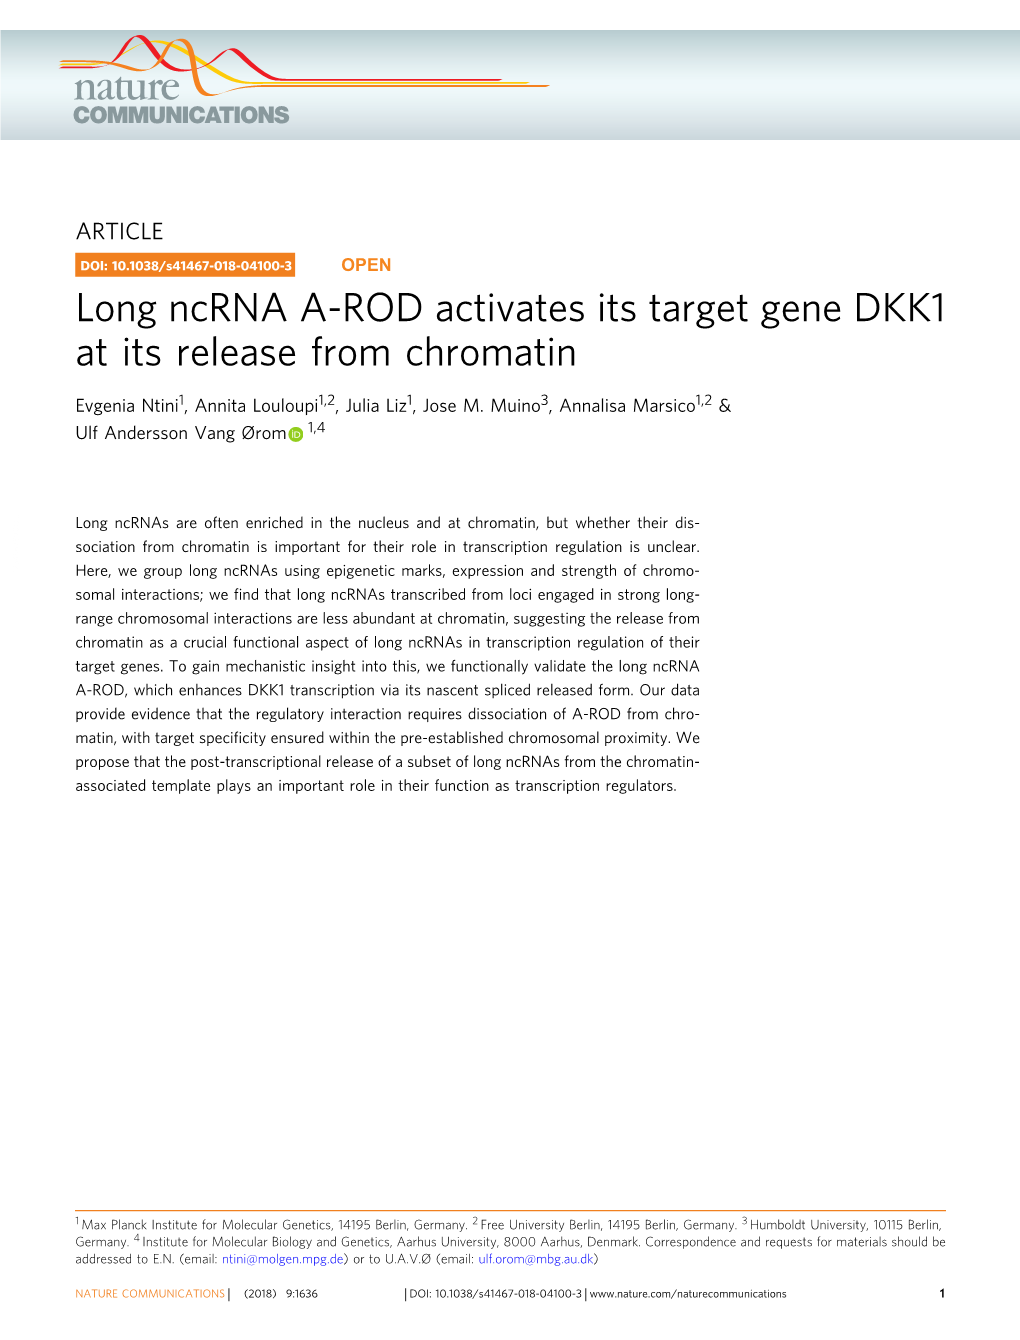 Long Ncrna A-ROD Activates Its Target Gene DKK1 at Its Release from Chromatin